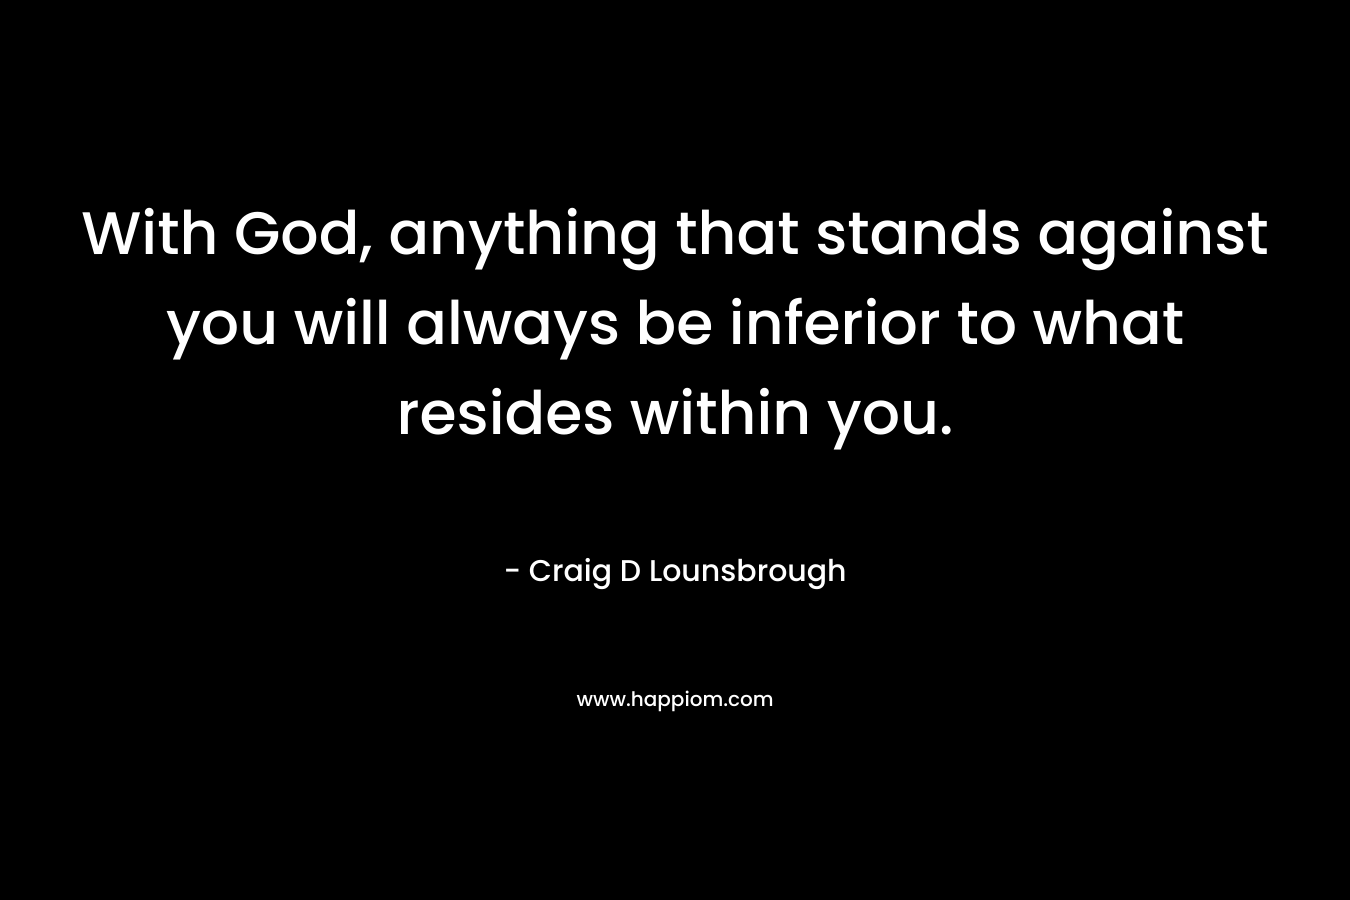 With God, anything that stands against you will always be inferior to what resides within you.